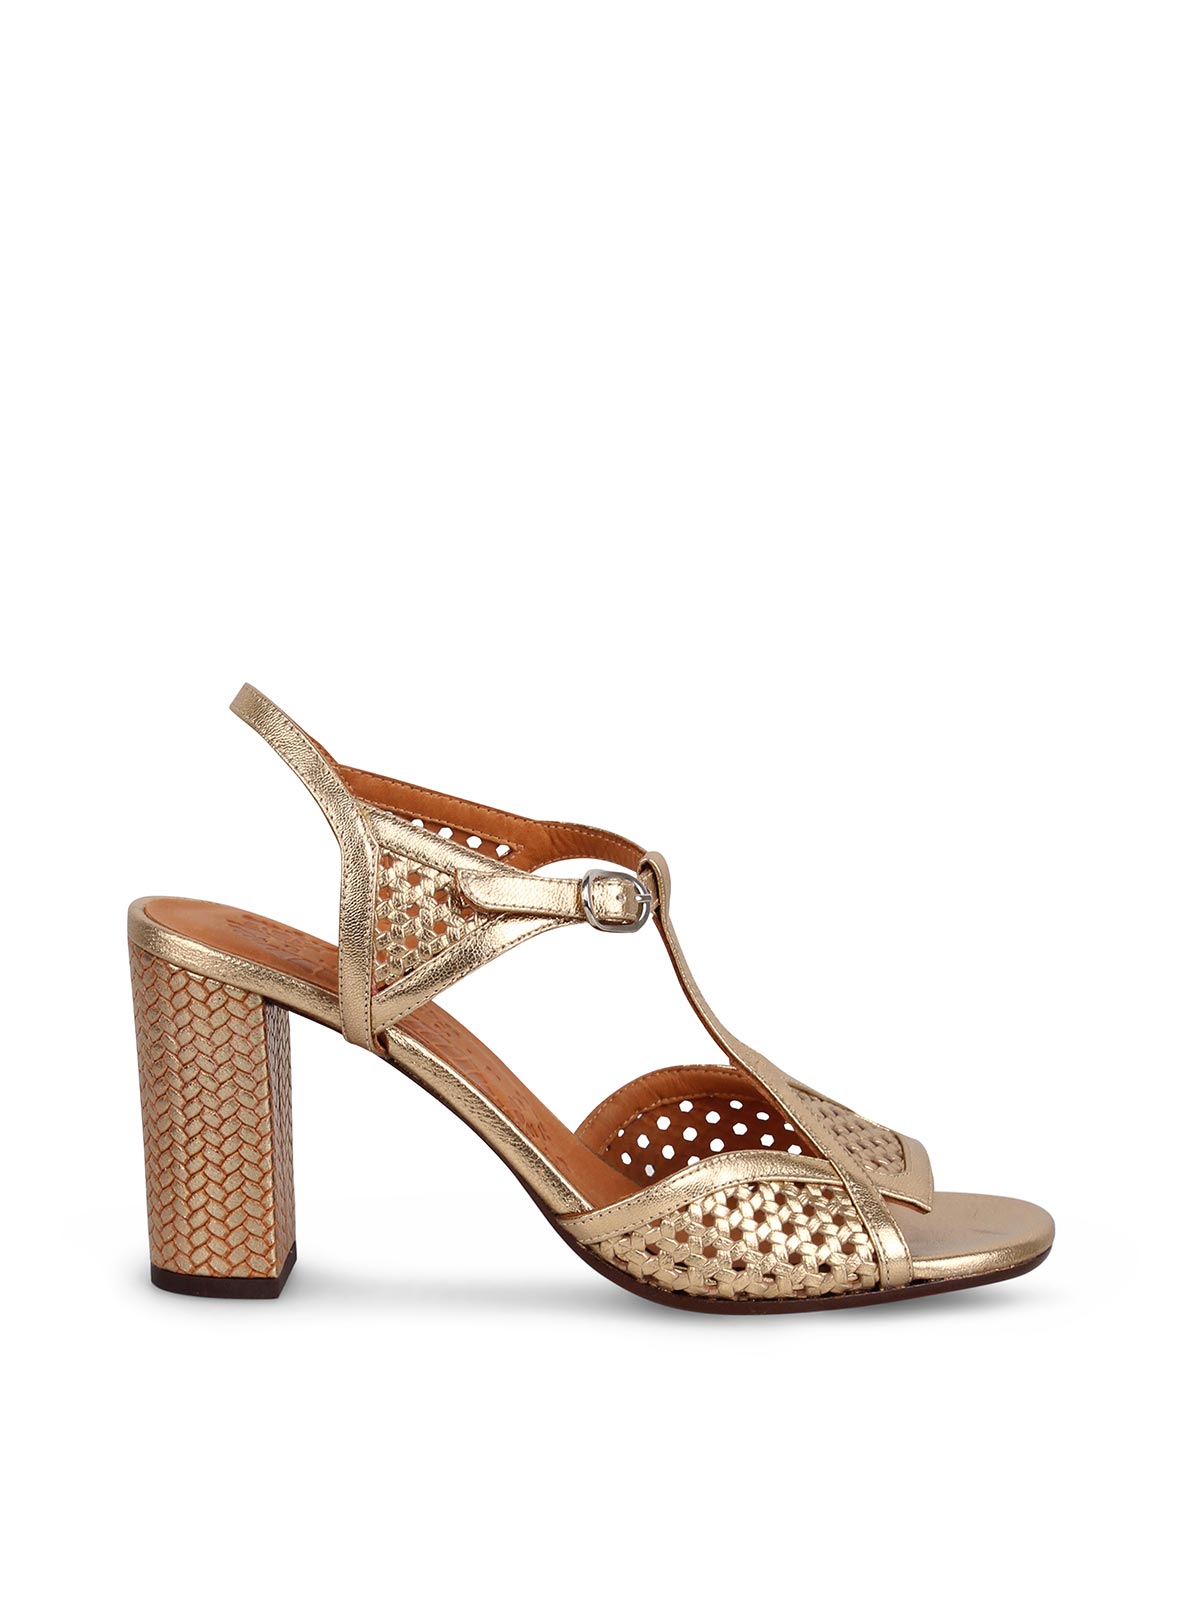 Chie Mihara Bessy Metallic Sandals In Gold